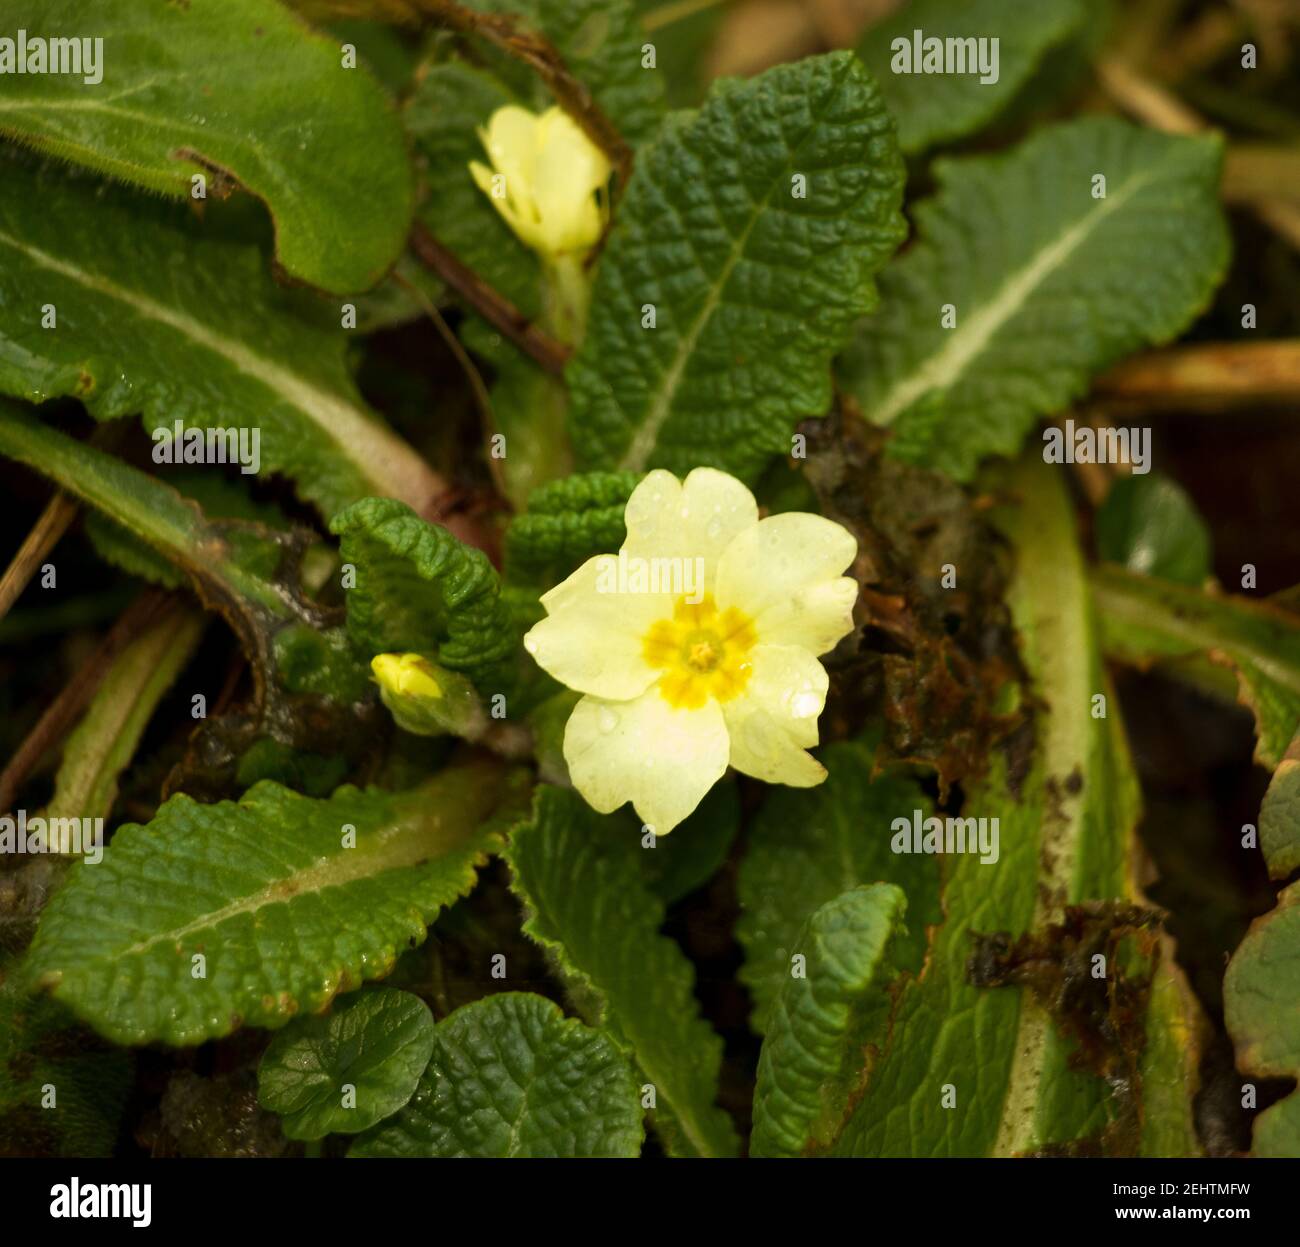 The Primrose is an early flowering perennial of the Primula family. They stand out on the floor of the UK's woodlands in late winter and early spring. Stock Photo